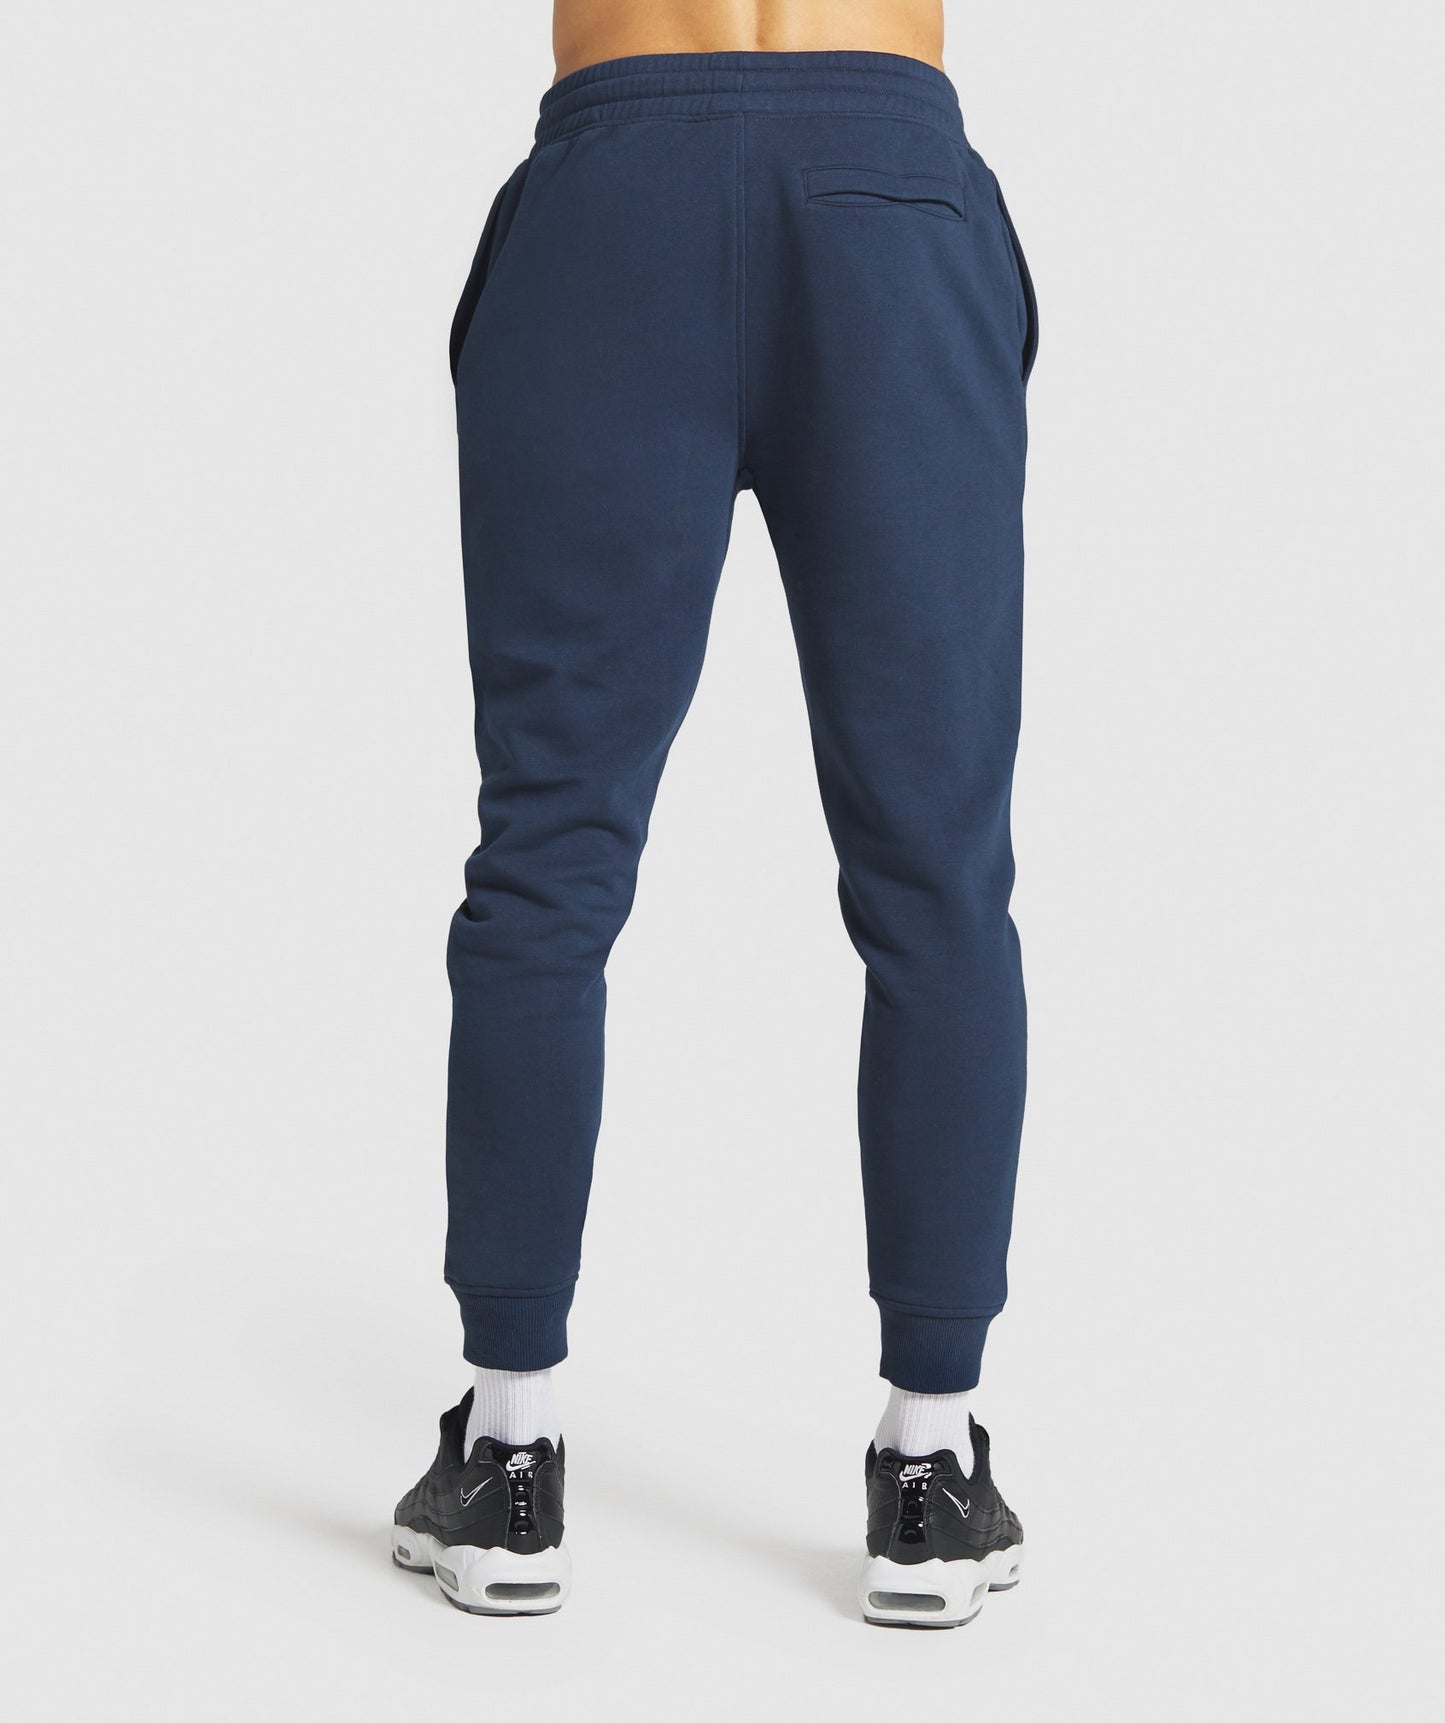 Gymshark Crest Joggers - Navy – Client 446 100K products